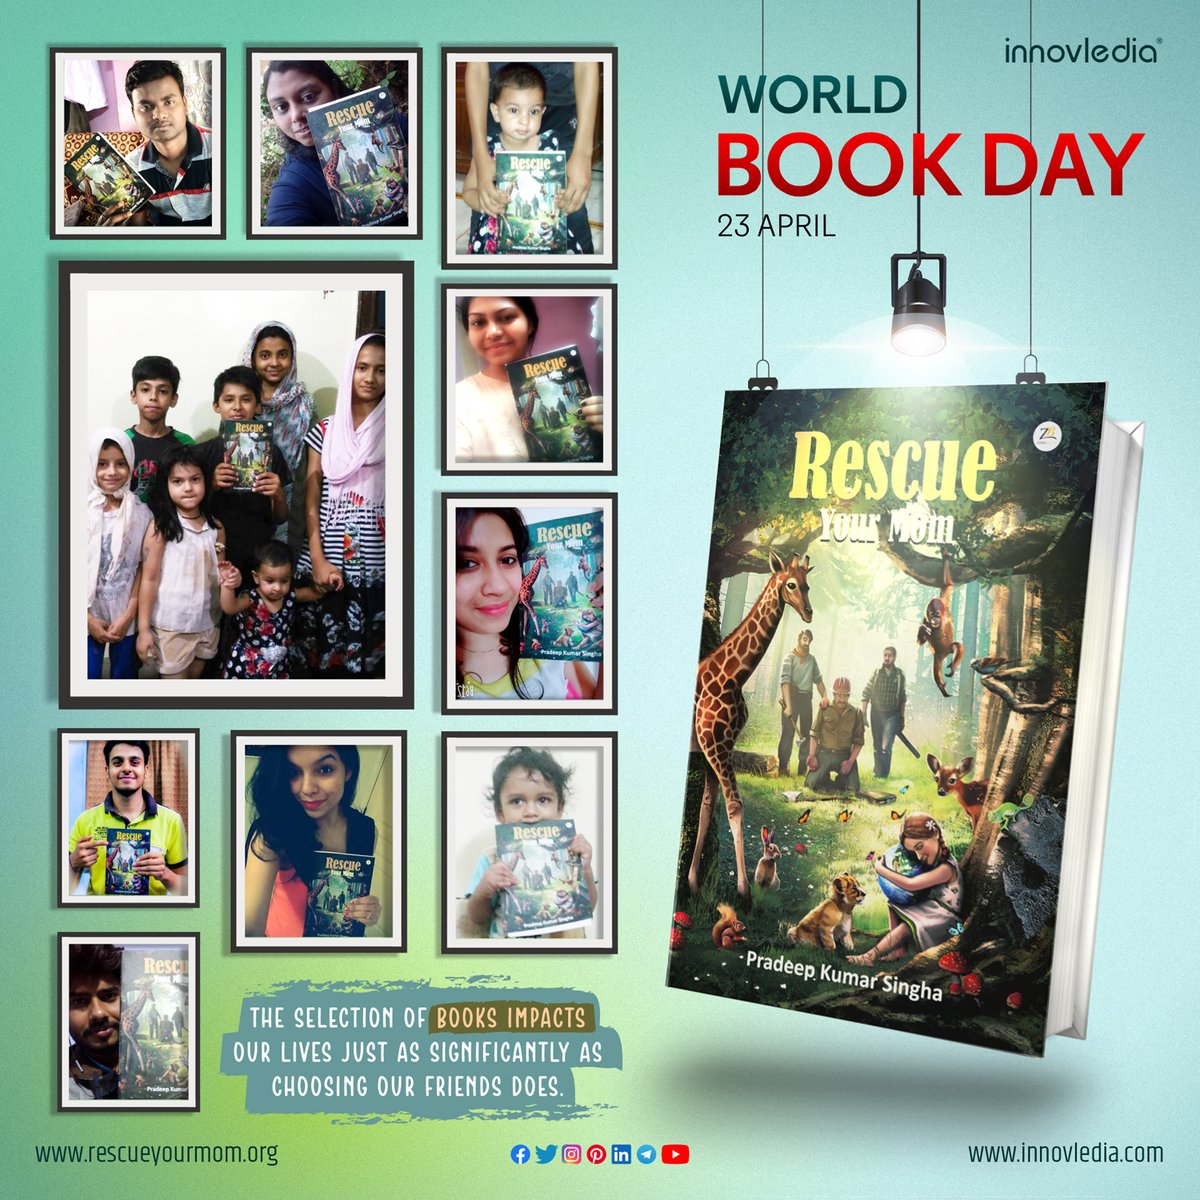 The selection of books impacts our lives just as significantly as choosing our friends does. Celebrating World Book Day 📚🕯😊 and 7 years of our book : @RescueYourMom 🌍
#WorldBookDay #RescueYourMom #Innovledia #BookDay #BookLovers #ReadersUnite #Bookworm #Bookish #BookAddict